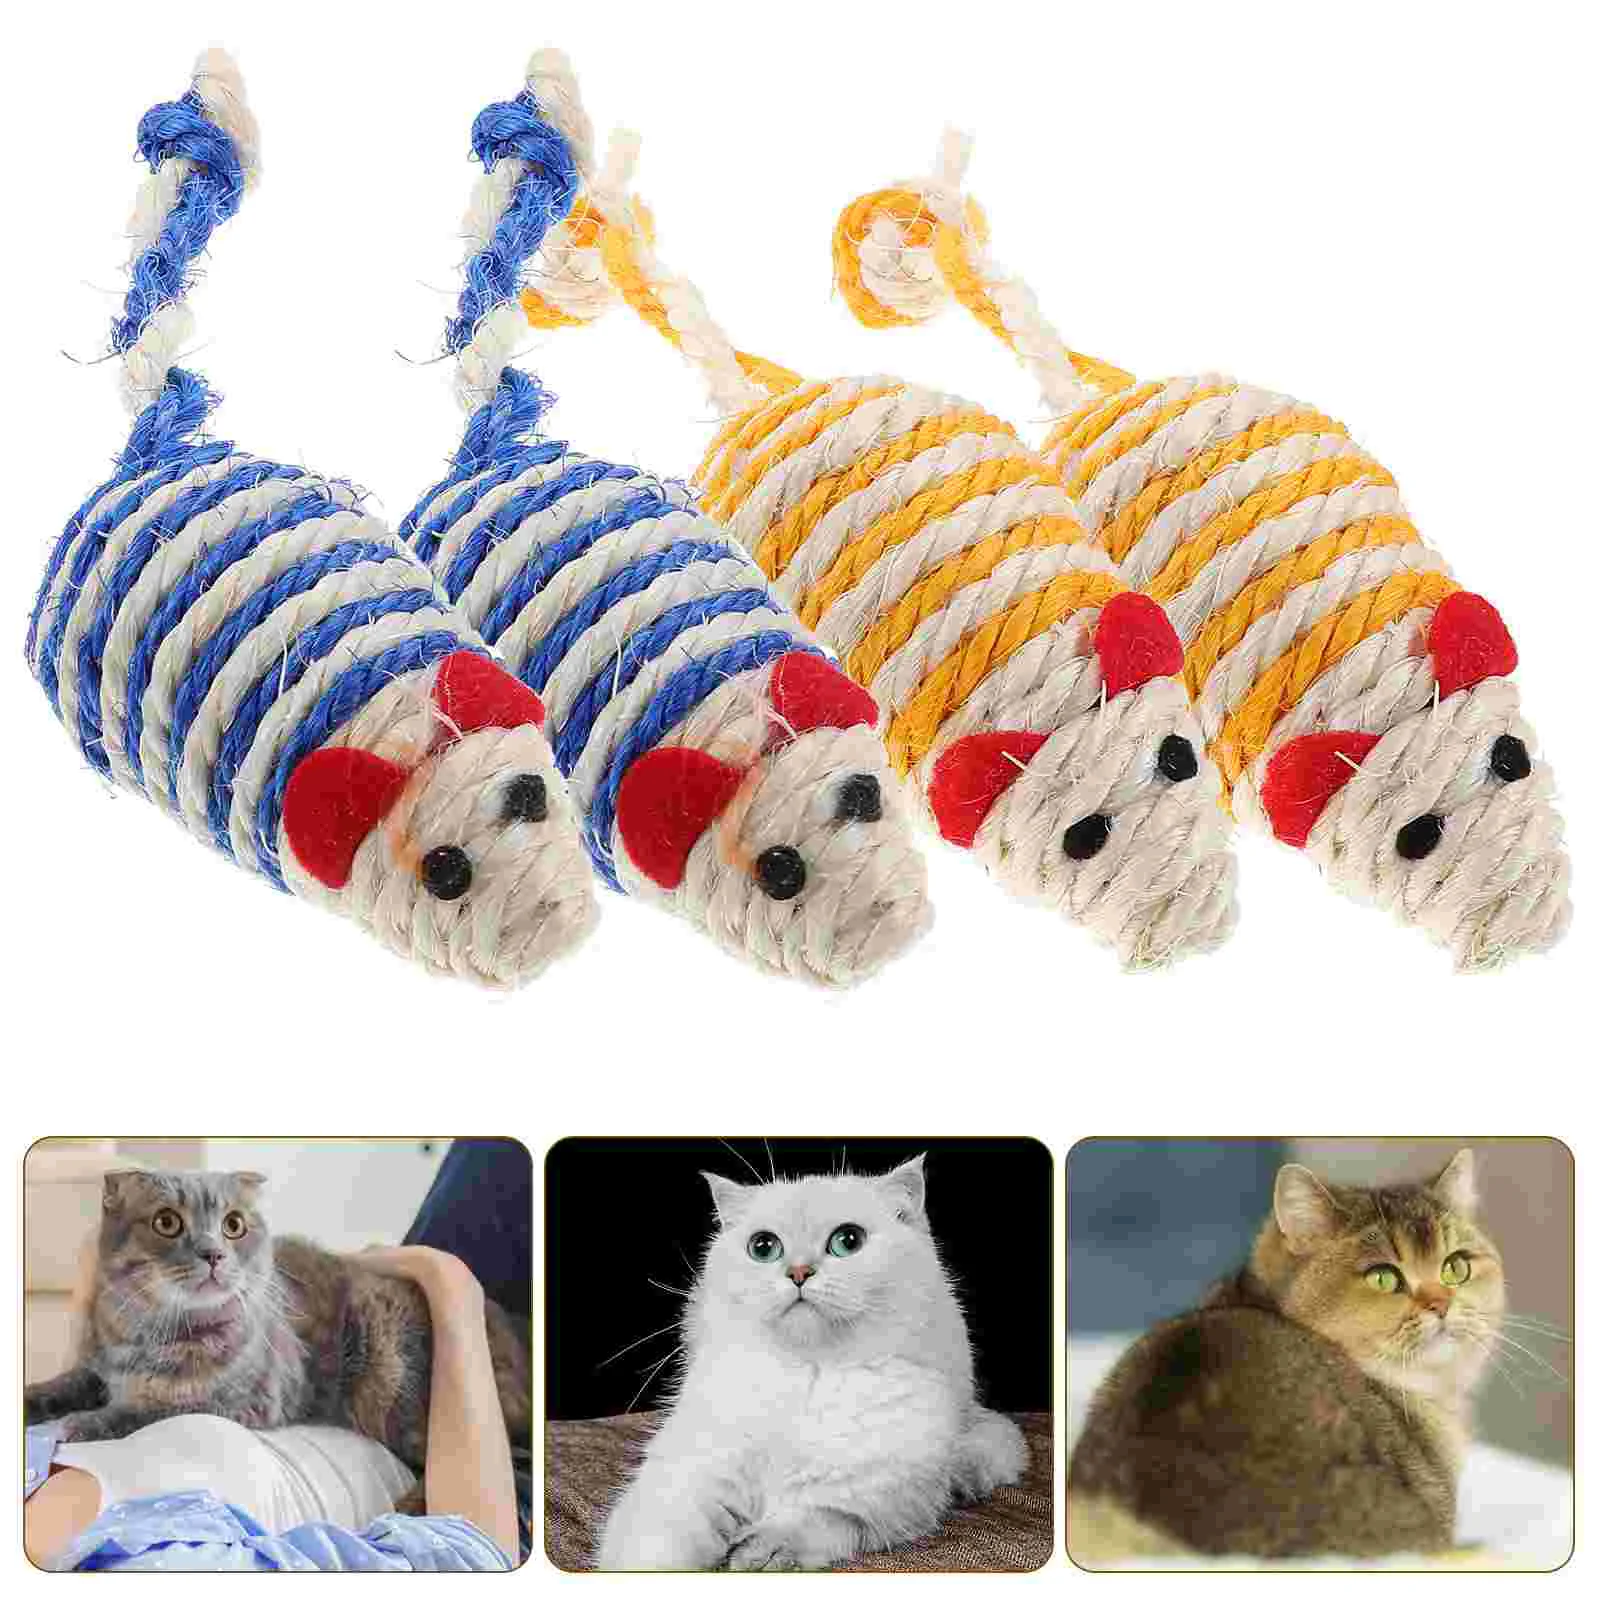 

4 Pcs Chew Toy Mouse Modeling Kitten Teething Toys Sisal Mice Cat Pet Cute For Cats Indoor